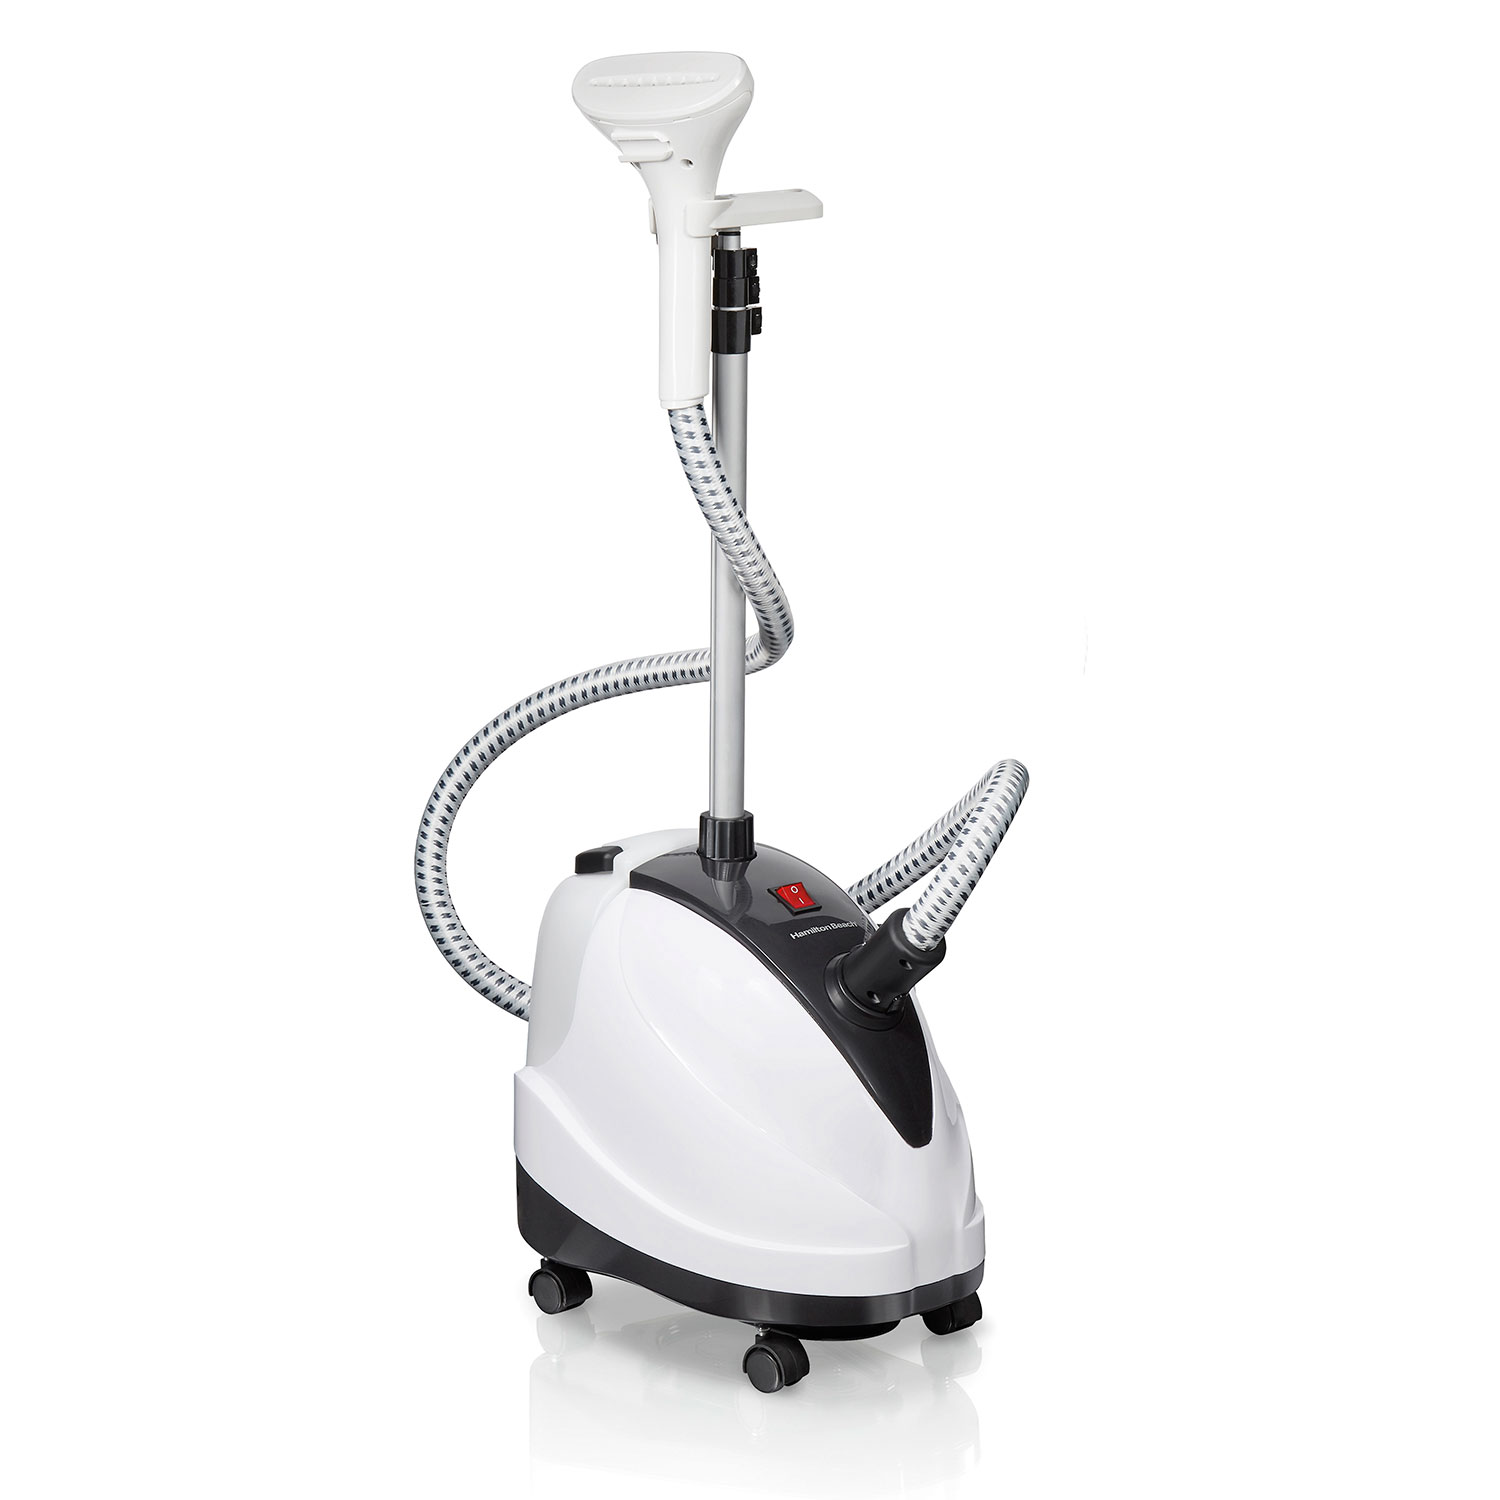 Full-Size Garment Steamer, Continuous Steaming (11552)